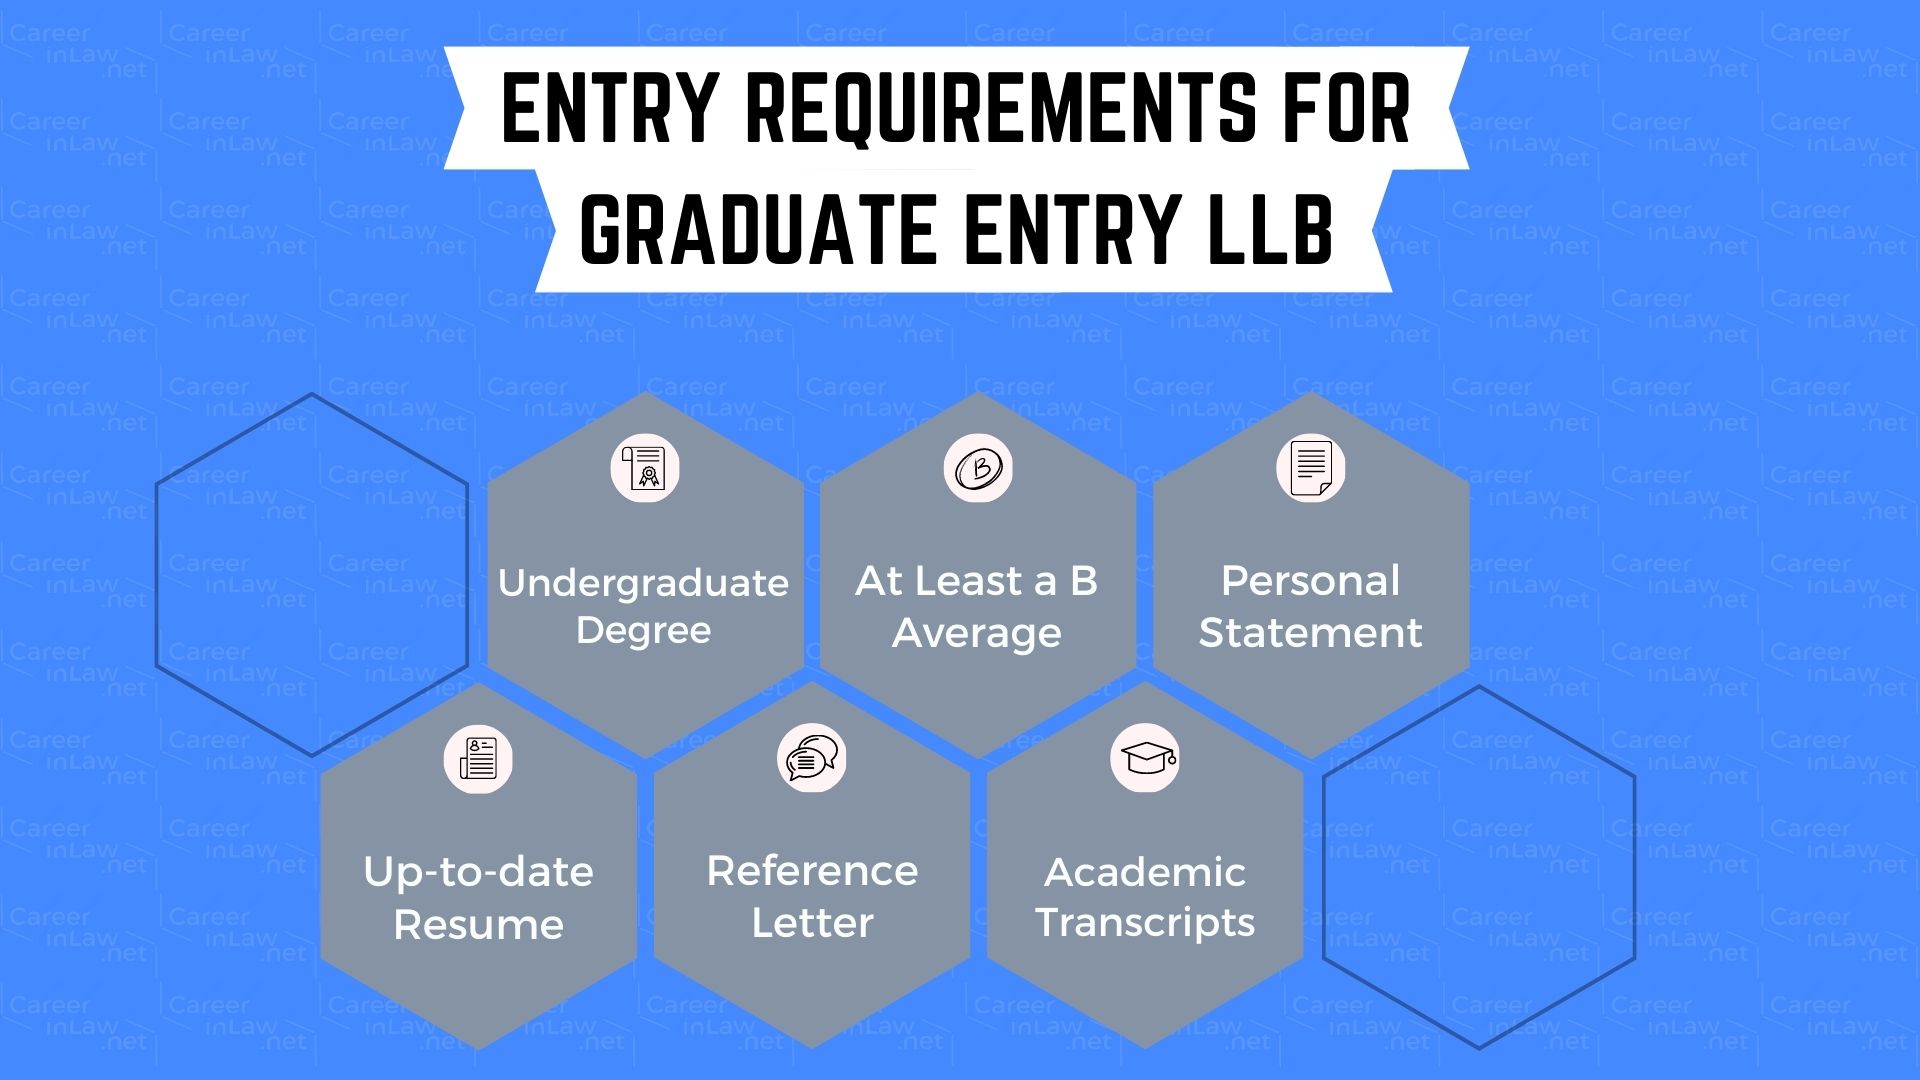 Entry Requirements for the Accelerated LLB in the UK